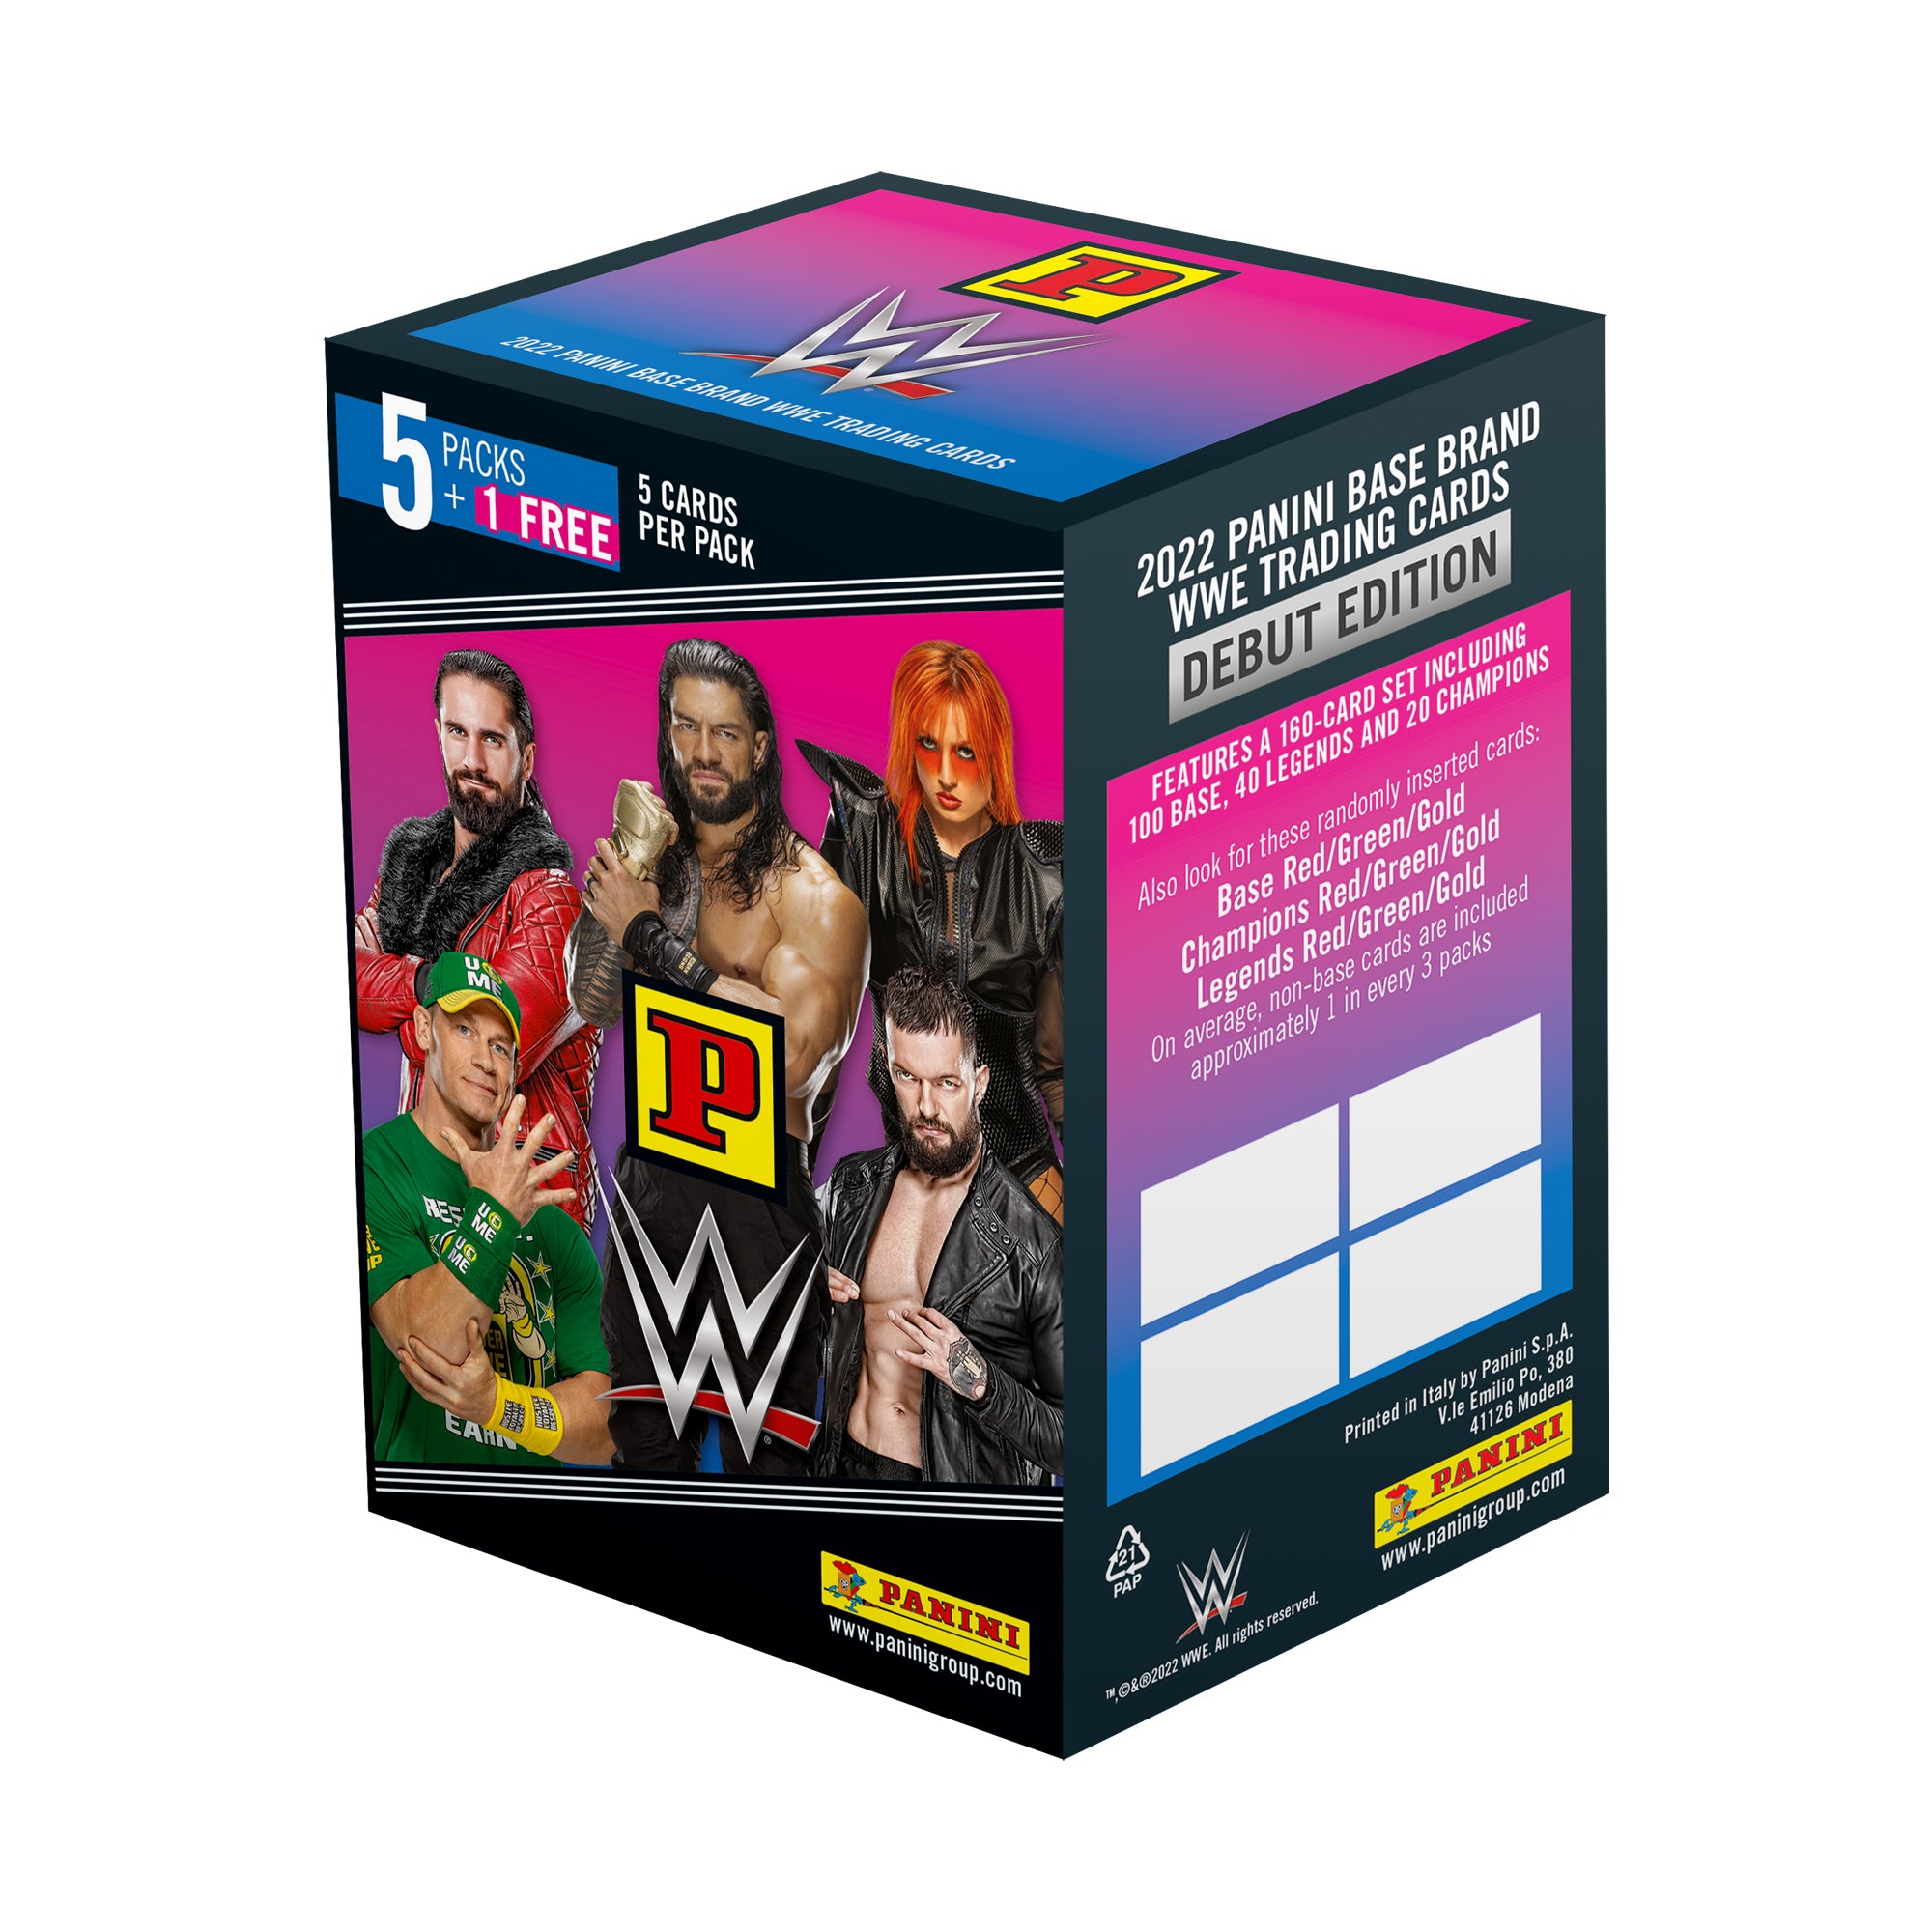 2022 PANINI DEBUT EDITION WWE CARDS - BLASTER BOX (30 CARDS) (IN STOCK MAR 5)